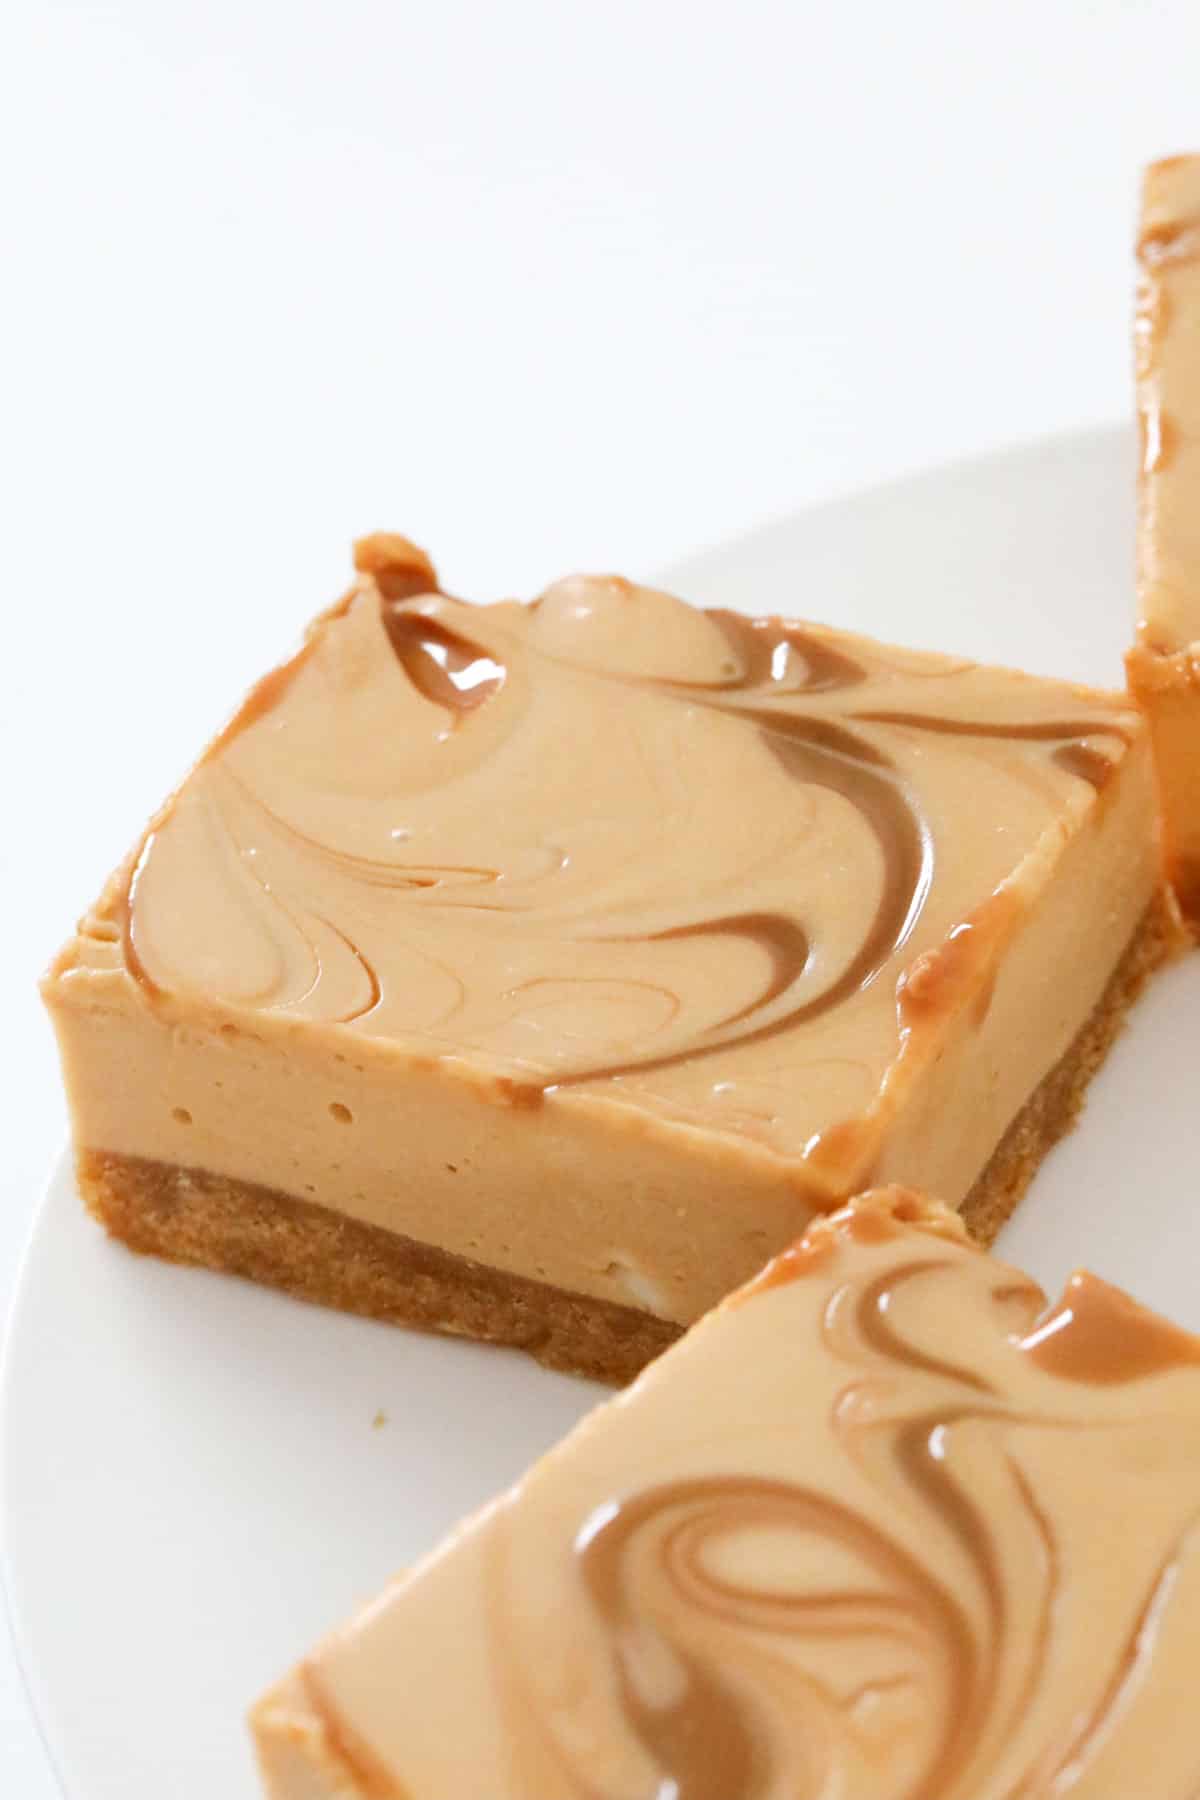 Squares of a caramel slice swirled with caramel sauce.